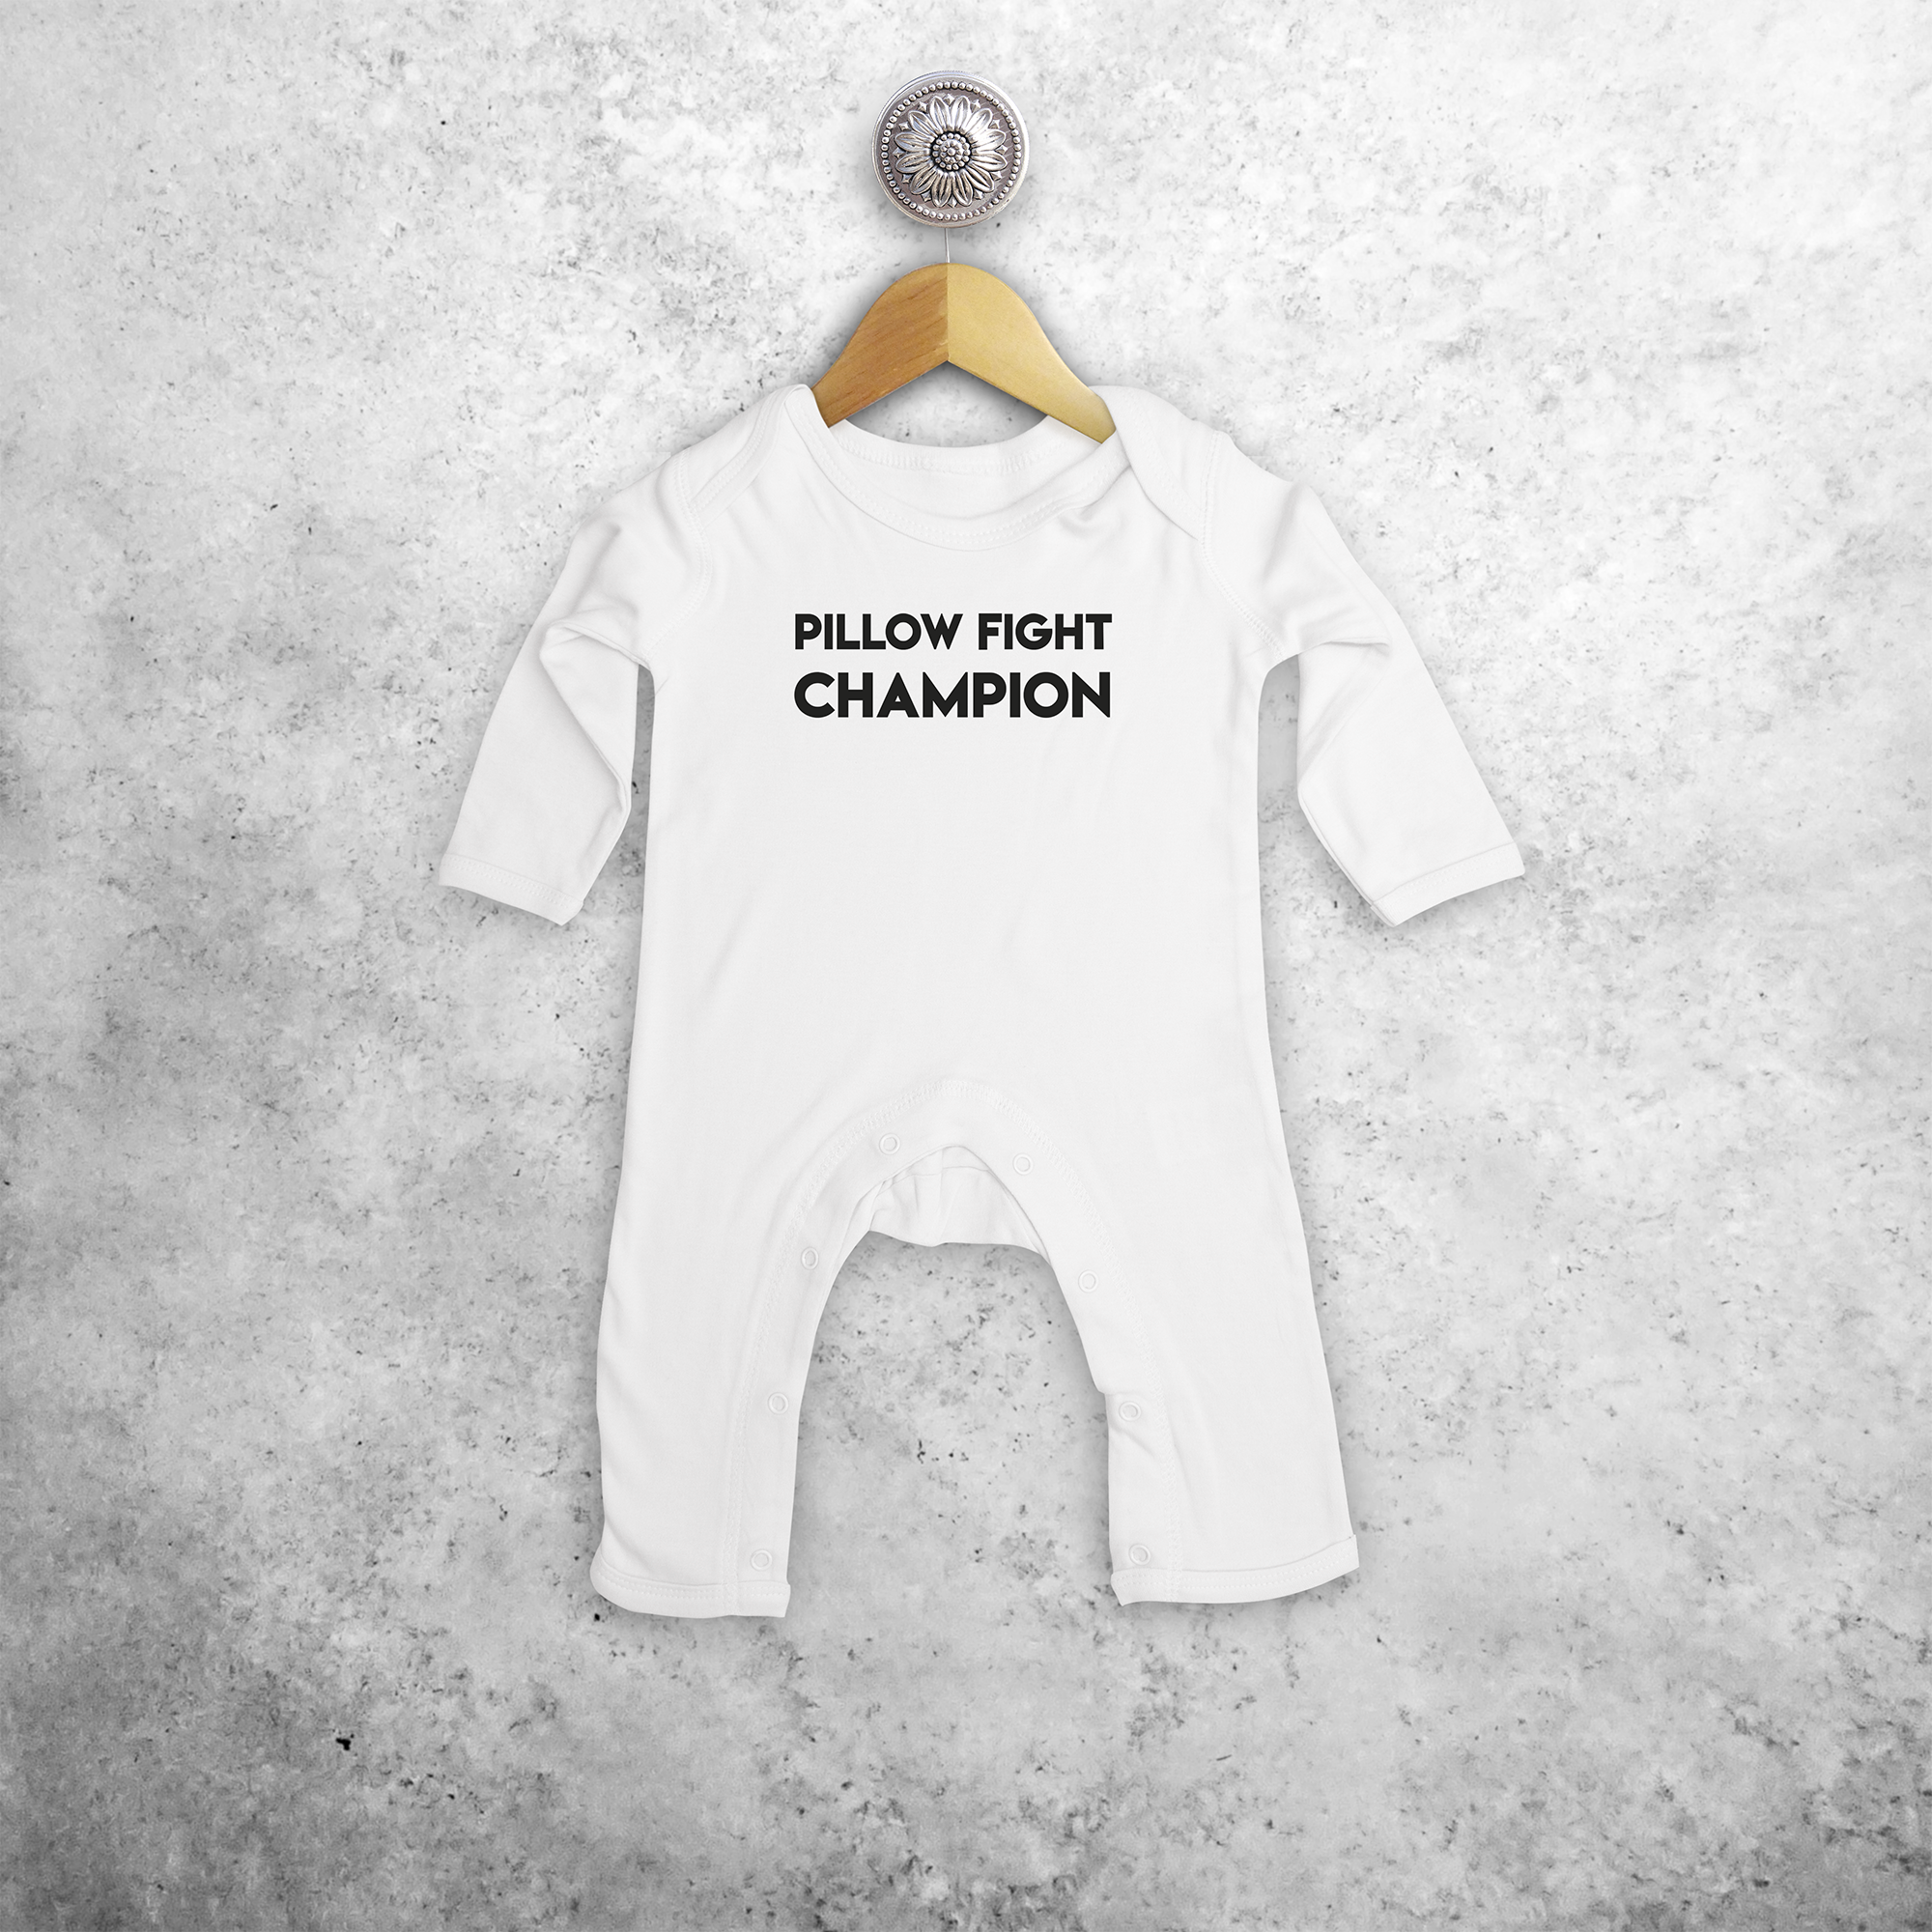 'Pillow fight champion' baby romper